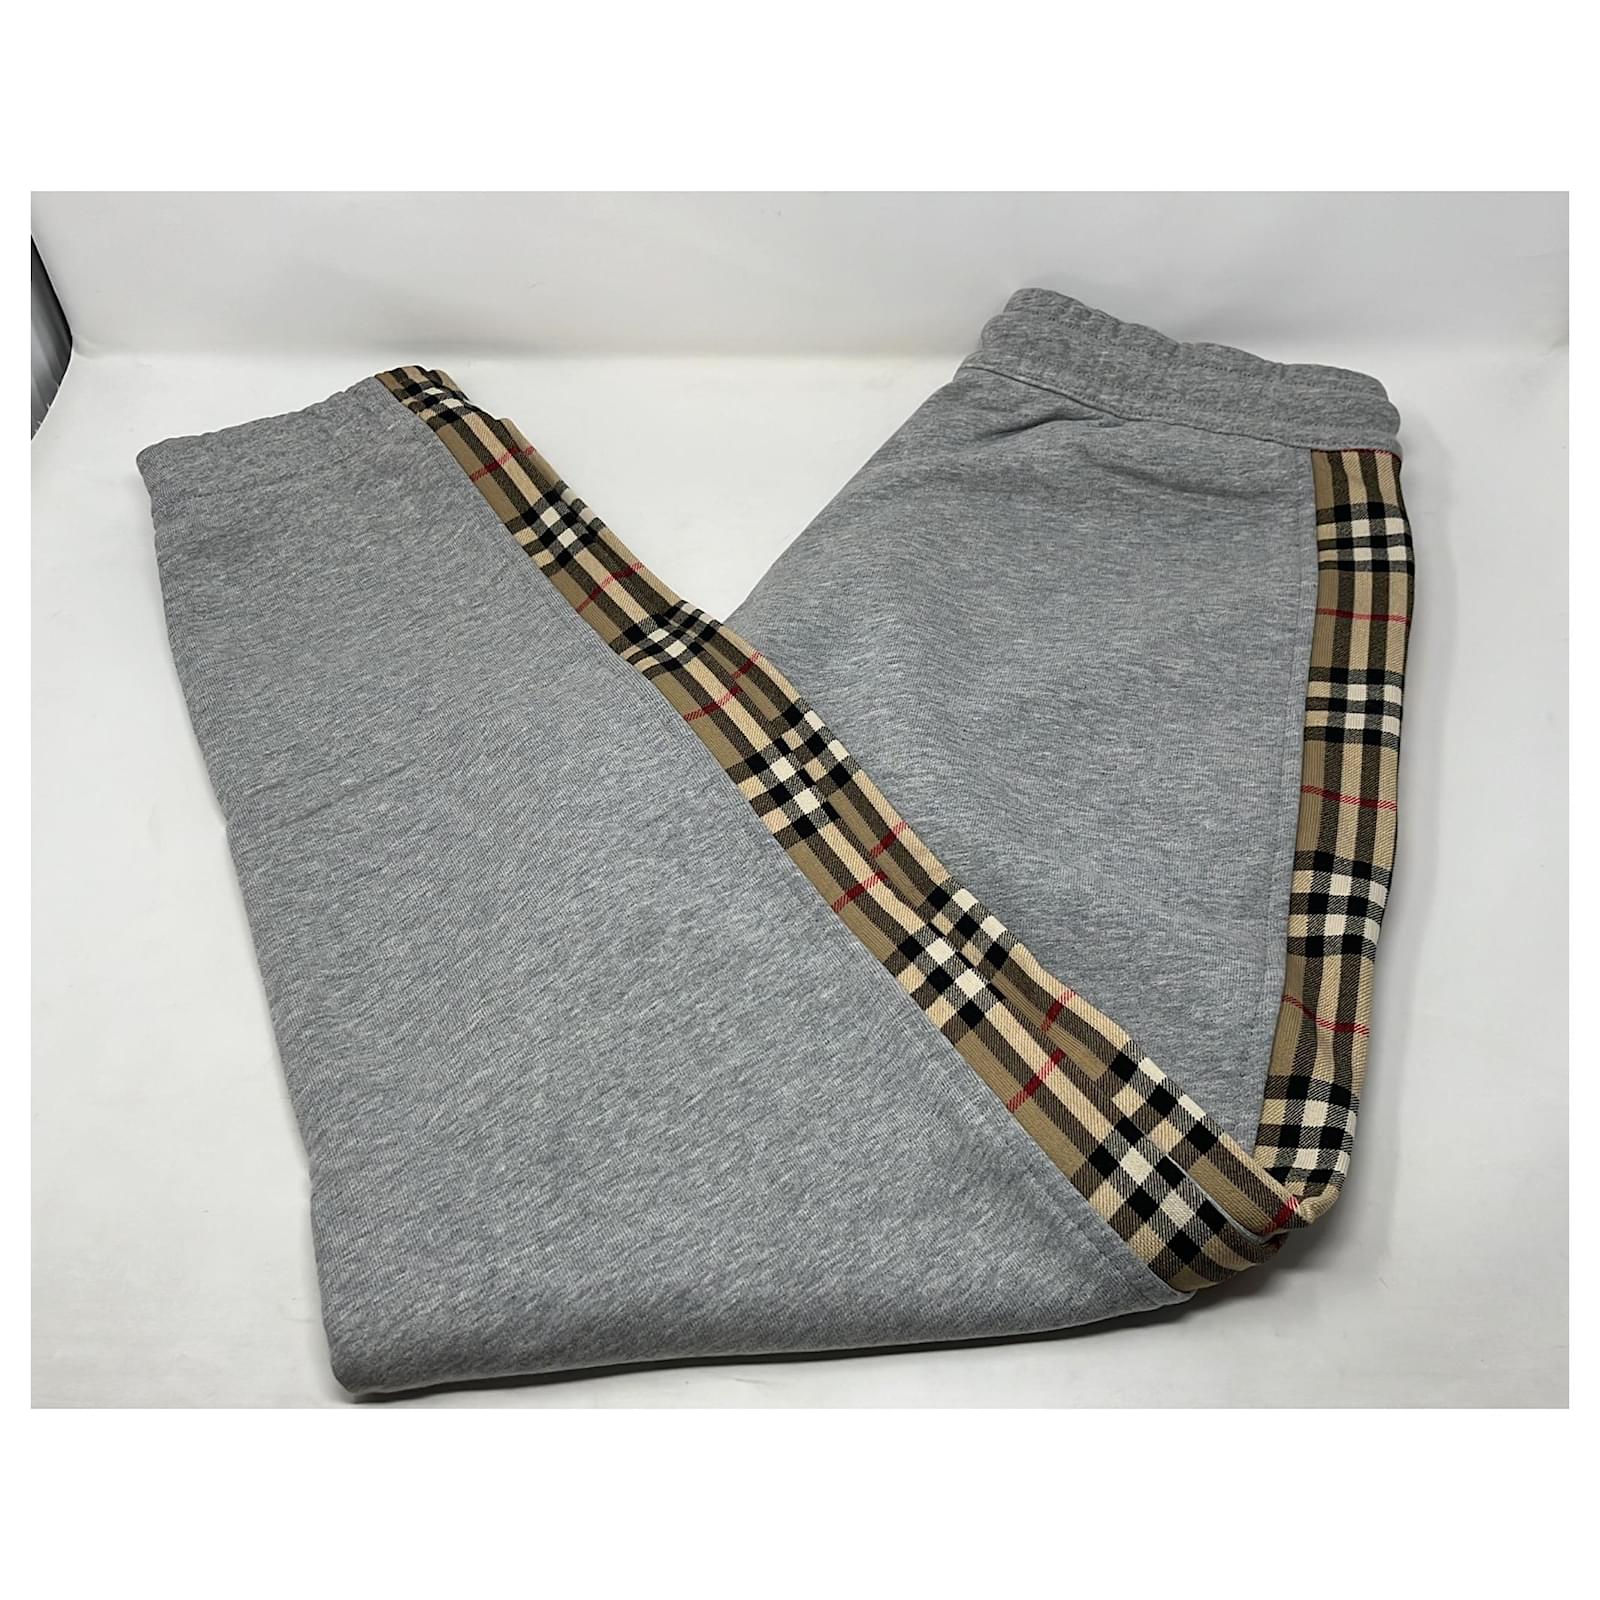 Burberry Pants in Nigeria for sale  Prices on Jijing